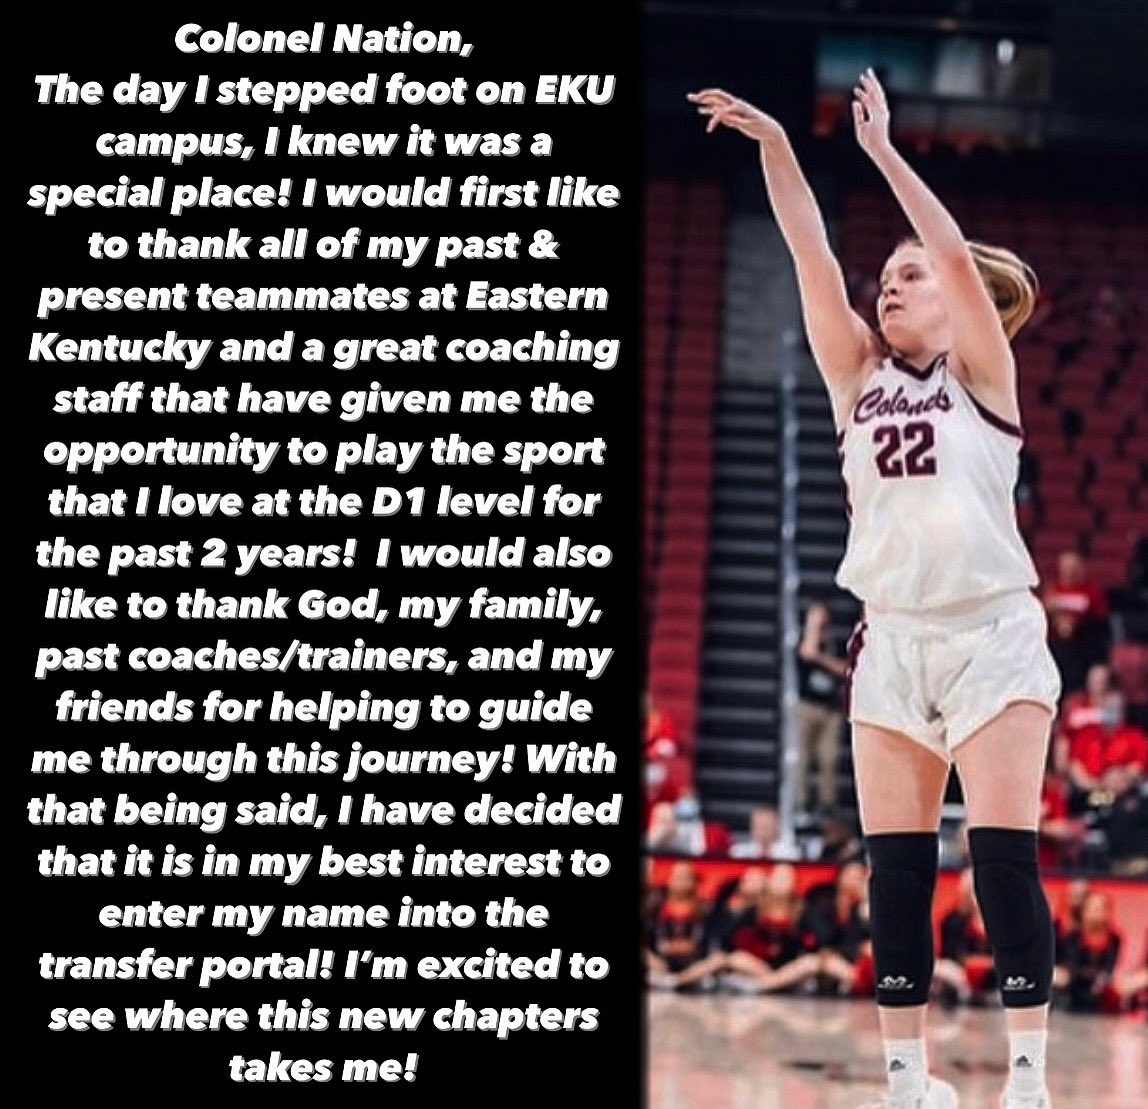 Thank you Colonel Nation 🖤